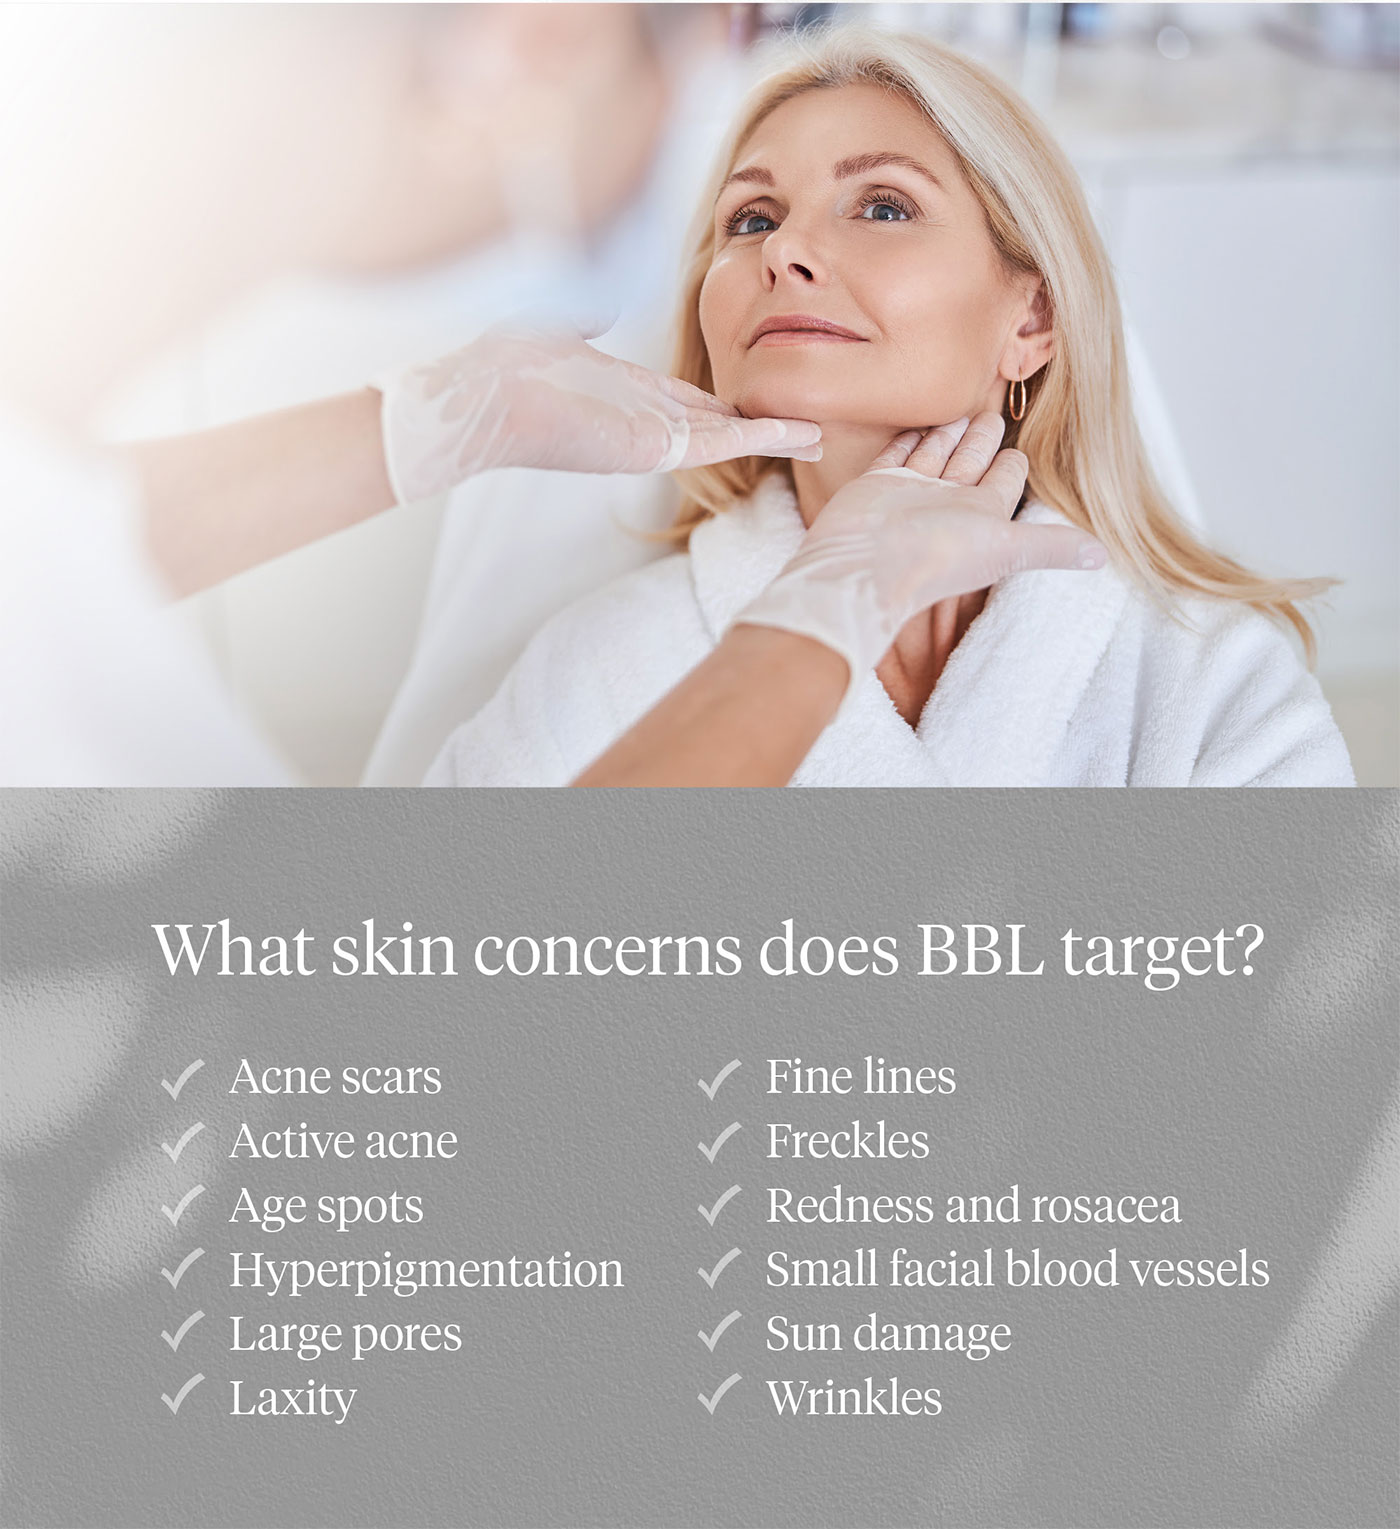 What skin concerns does BBL target? Acne scars, active acne, age spots, hyperpigmentation, large pores, laxity, fine lines, freckles, redness and rosacea, small facial blood vessels, sun damage, wrinkles.